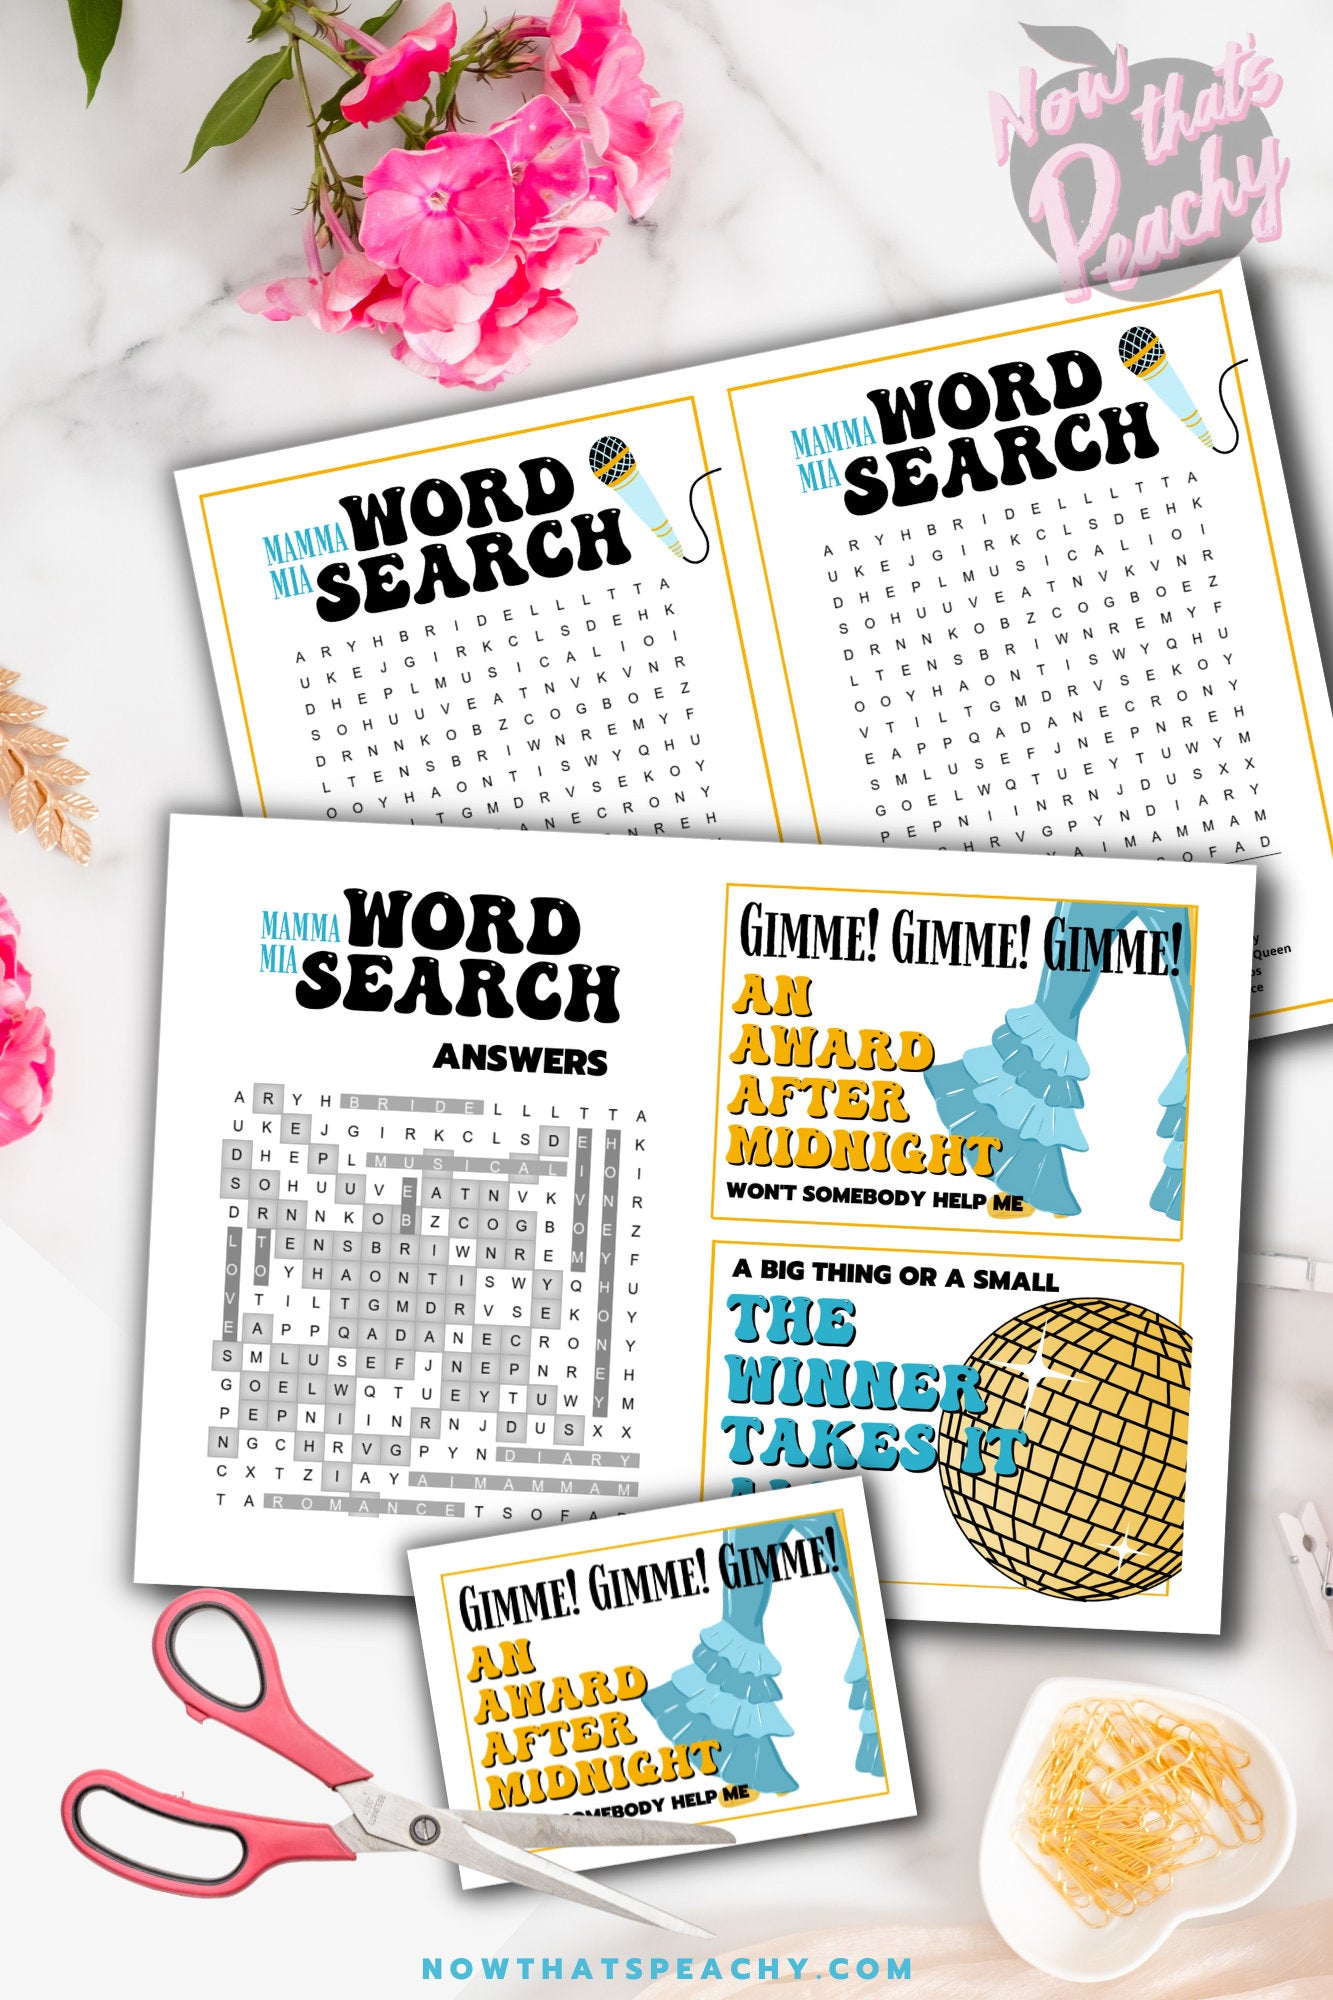 Mamma Mia word search quiz question game 1970s flared denim pants seventies 70's disco ball karaoke  printable template digital instant download edit Donna and the dynamos invite edit custom musical movie design black white modern color fun themed bachelorette birthday charity event activity